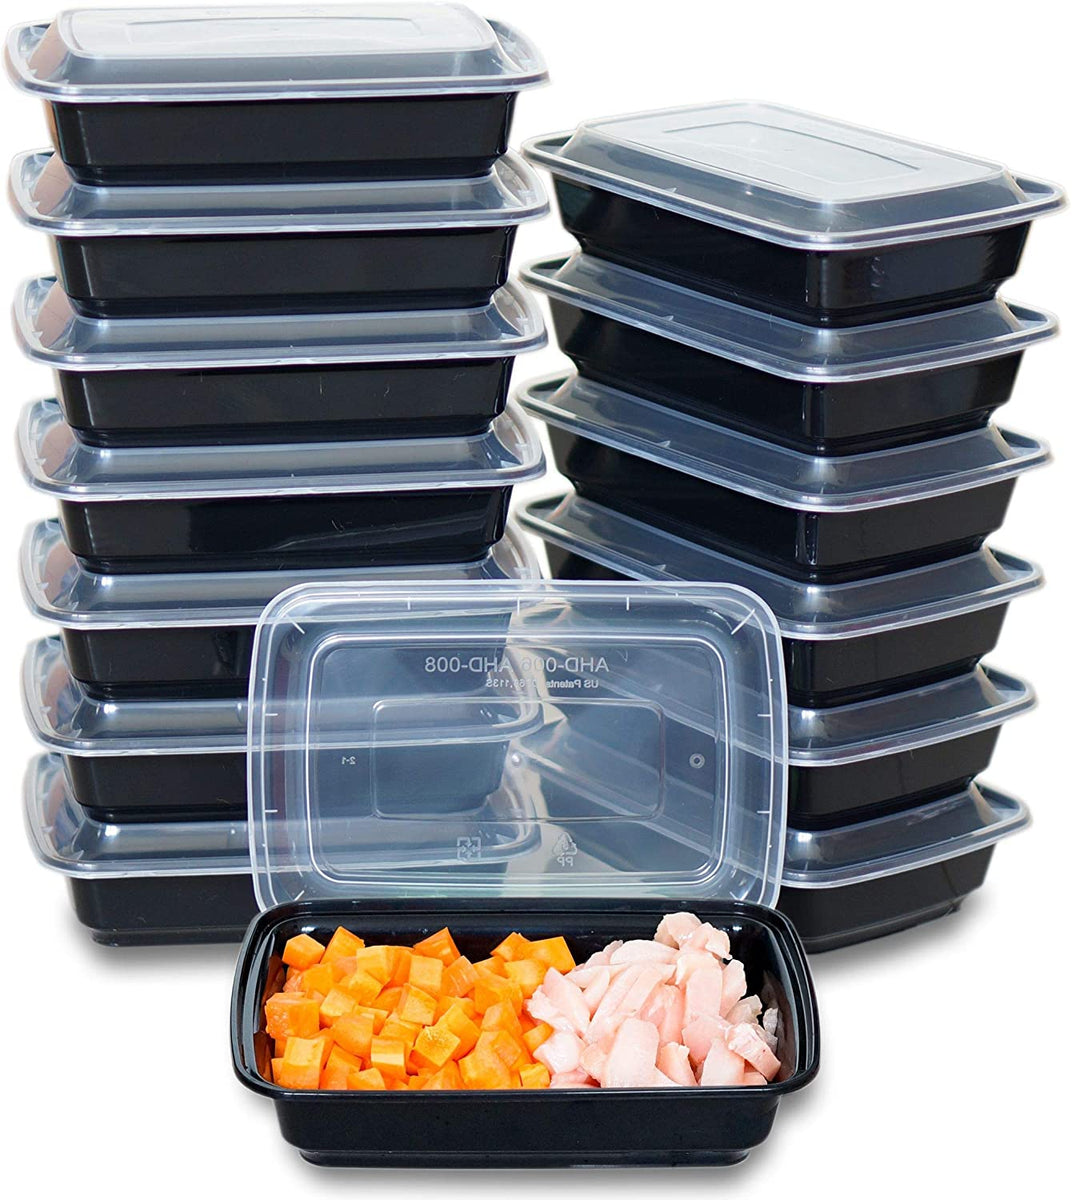 50-Pack Meal Prep Containers, 26 OZ Microwavable Reusable Food